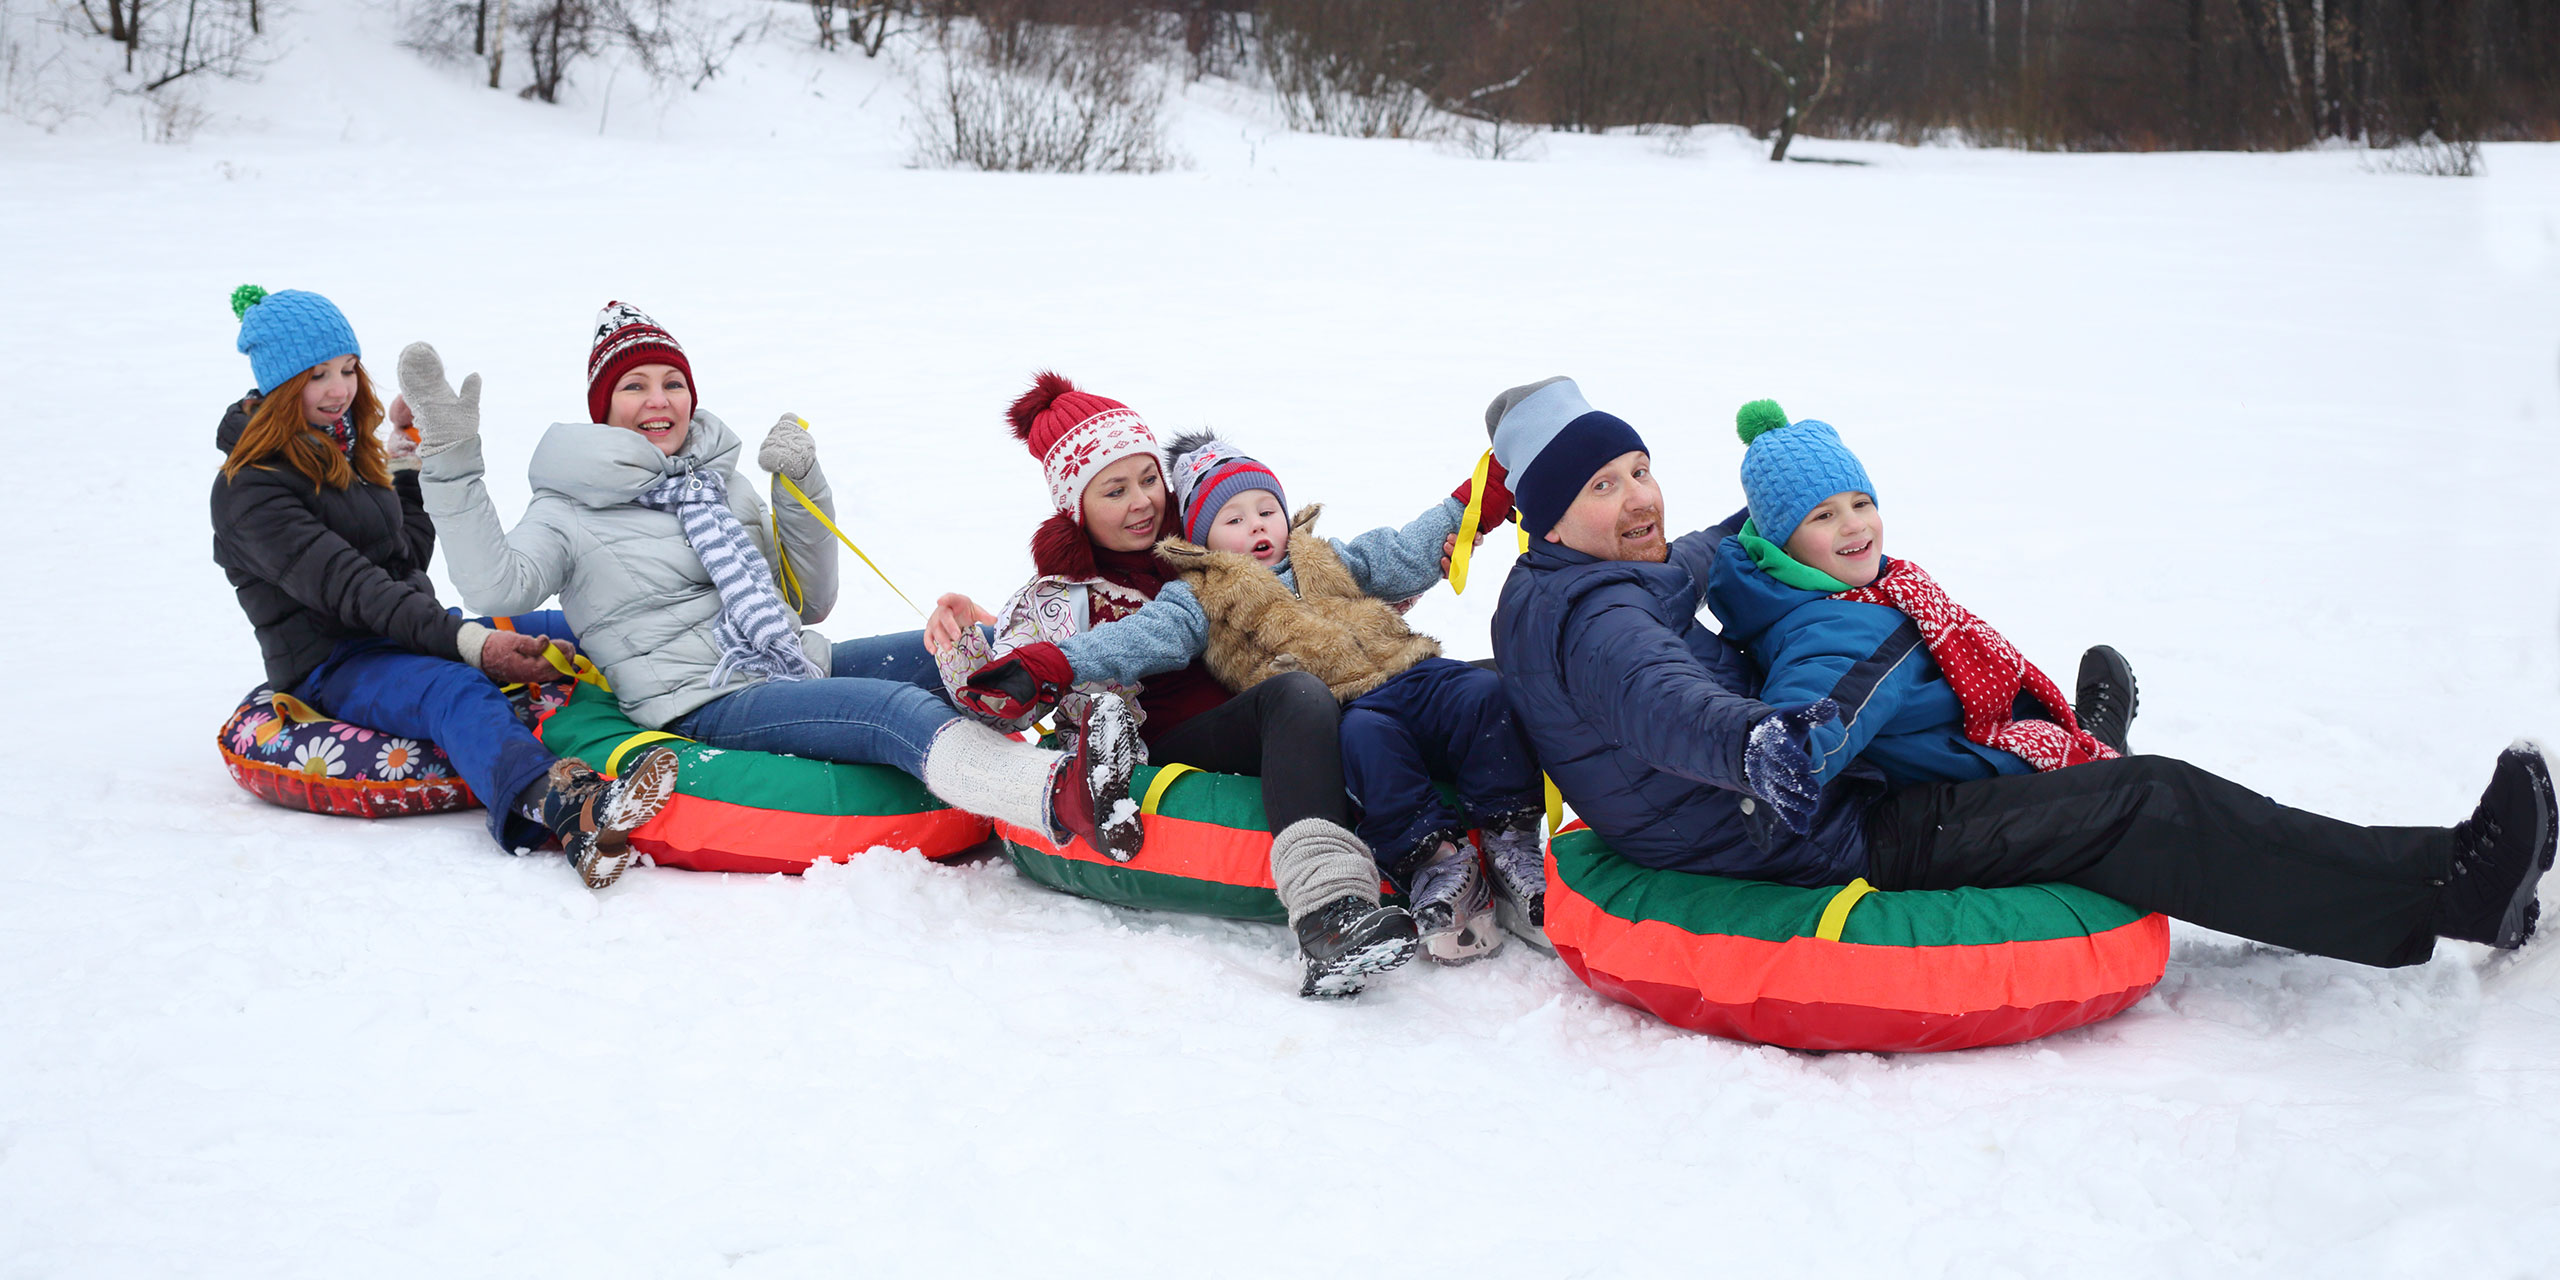 Snow Tubing; Courtesy of Pavel L Photo and Video/Shutterstock.com